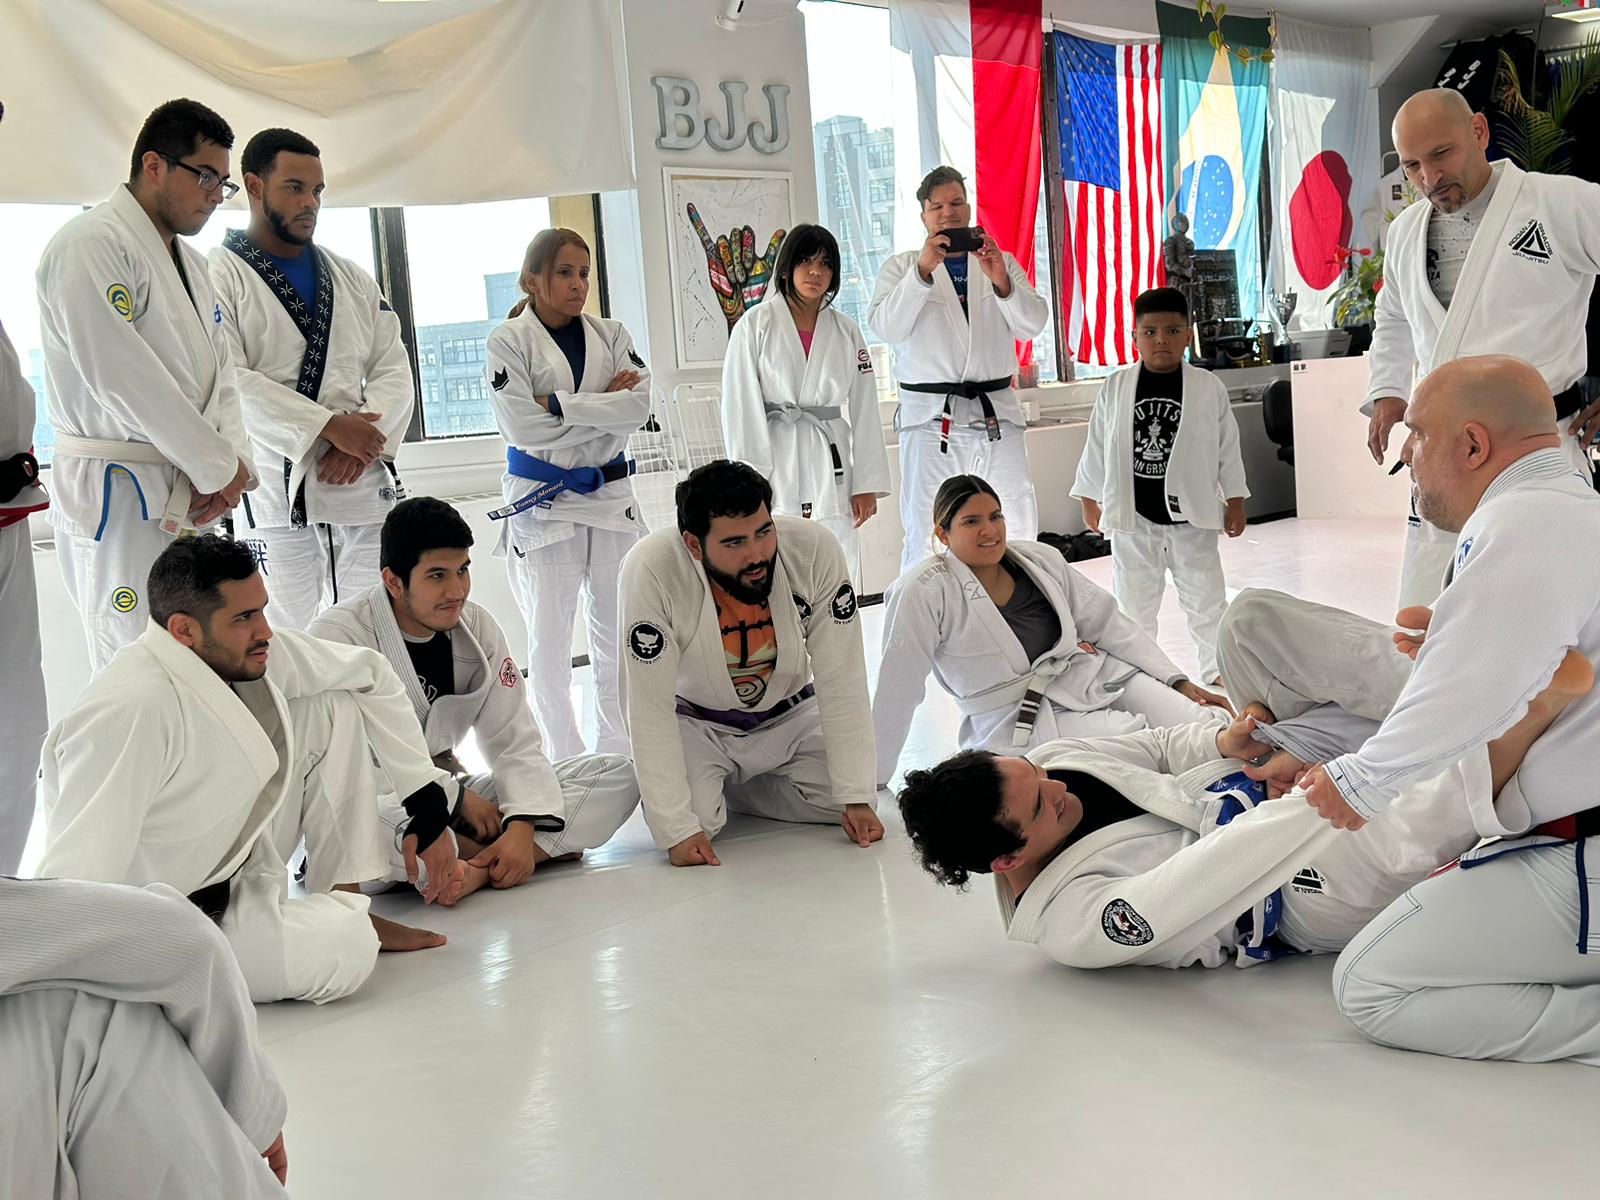 Experience the Rocian Gracie Jr. NYC BJJ Challenge: 3 days of BJJ training on us!